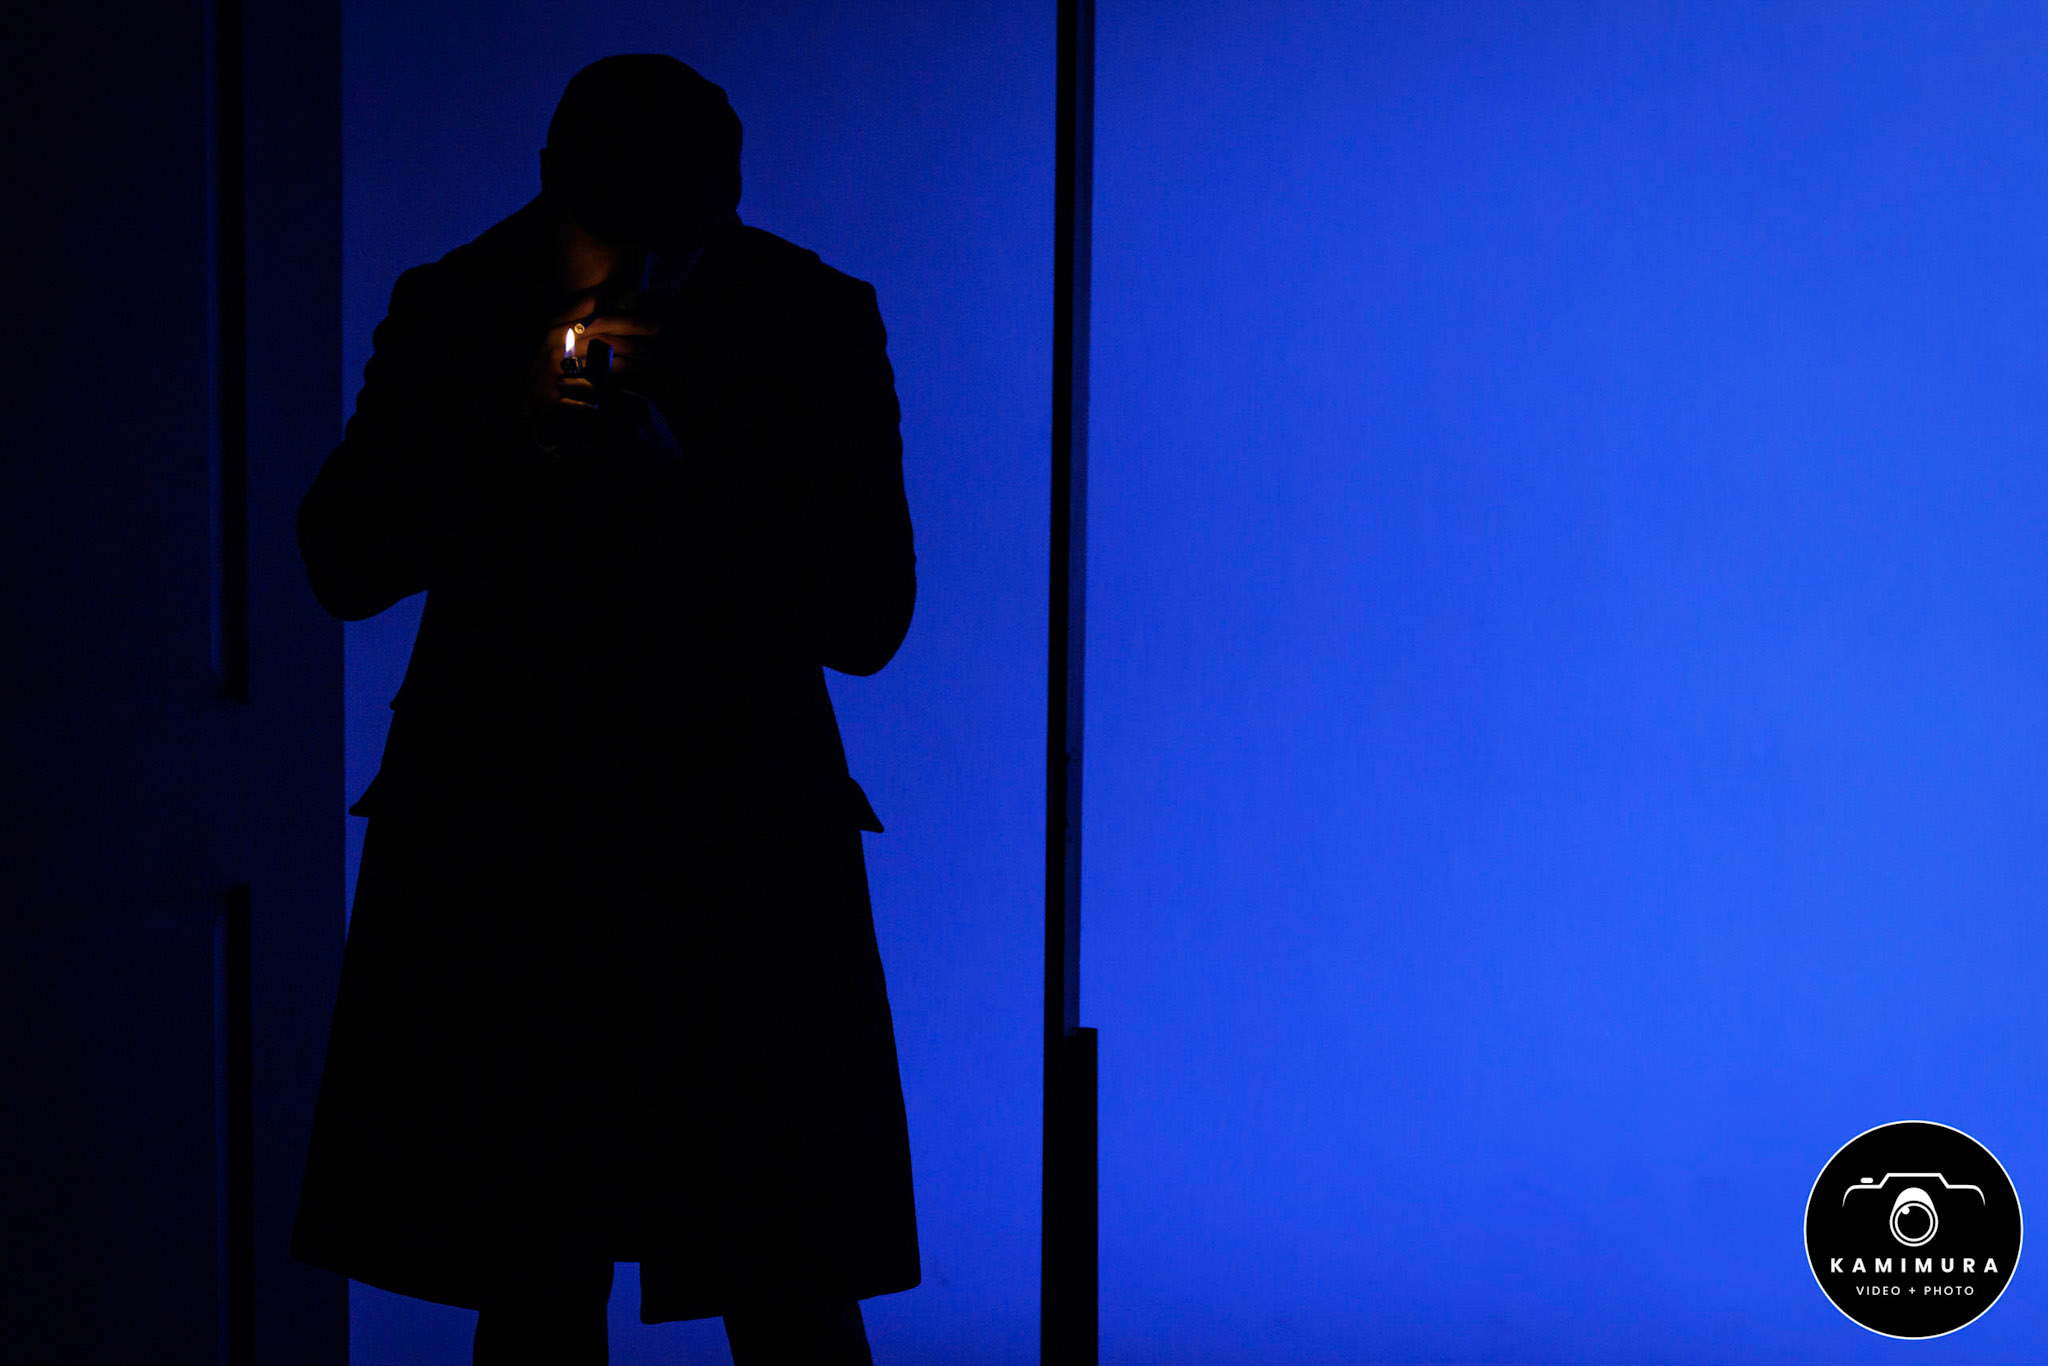 Silhouette of a man standing in a door frame, lighting a cigarette, standing against a blue background